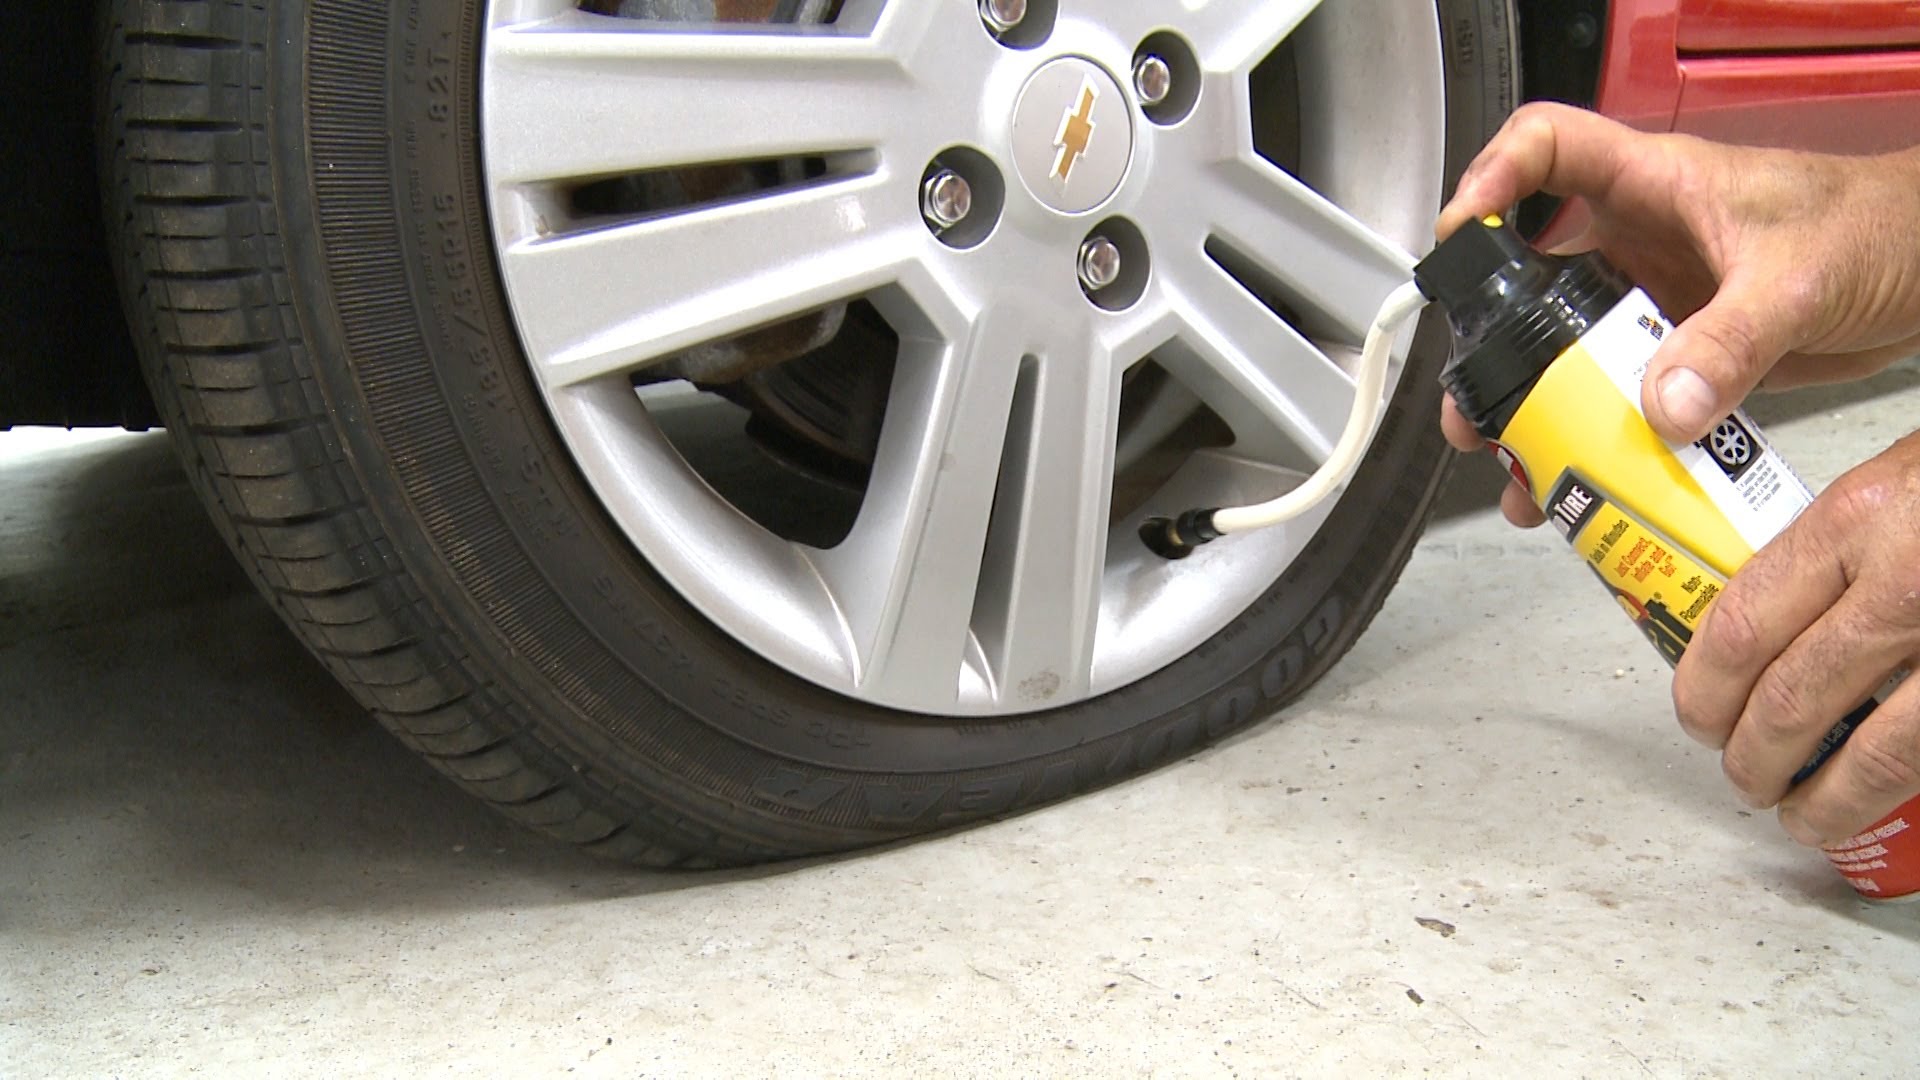 Flat tire fixes | Consumer Reports - YouTube